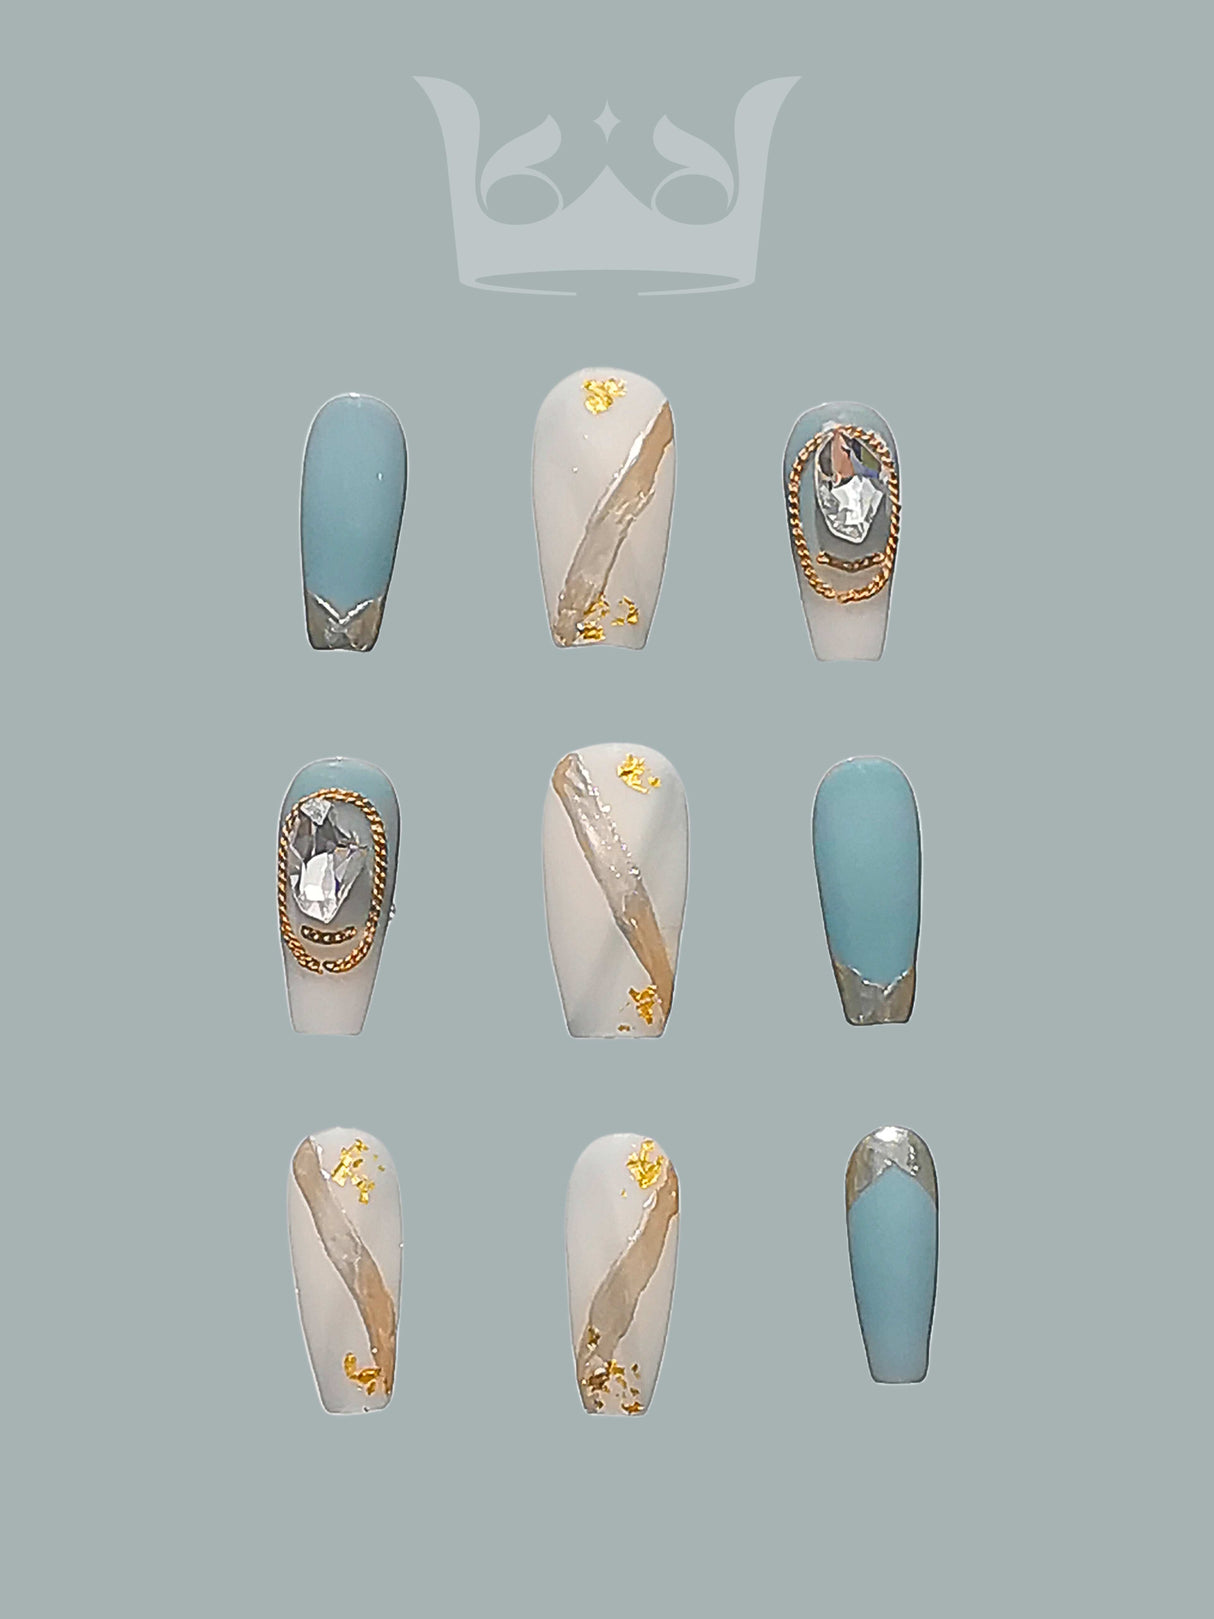 Sophisticated and elegant nails with pastel blue and white base color, gold accents, diamonds, marbled patterns, and rounded/oval tip shape for special occasions or fashion statement.